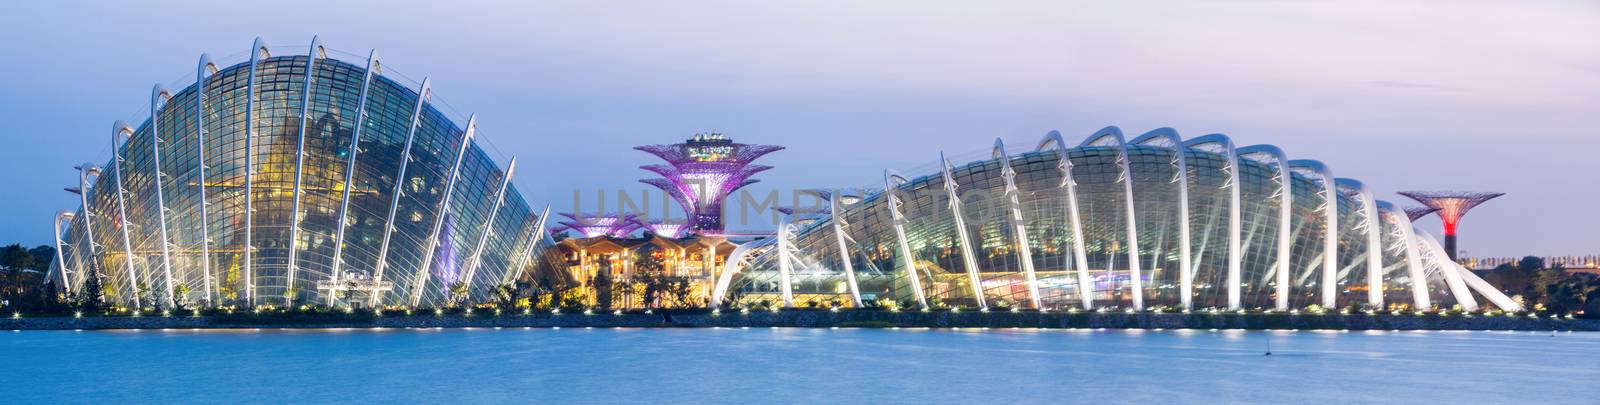 Panorama Singapore Garden by the bay by vichie81